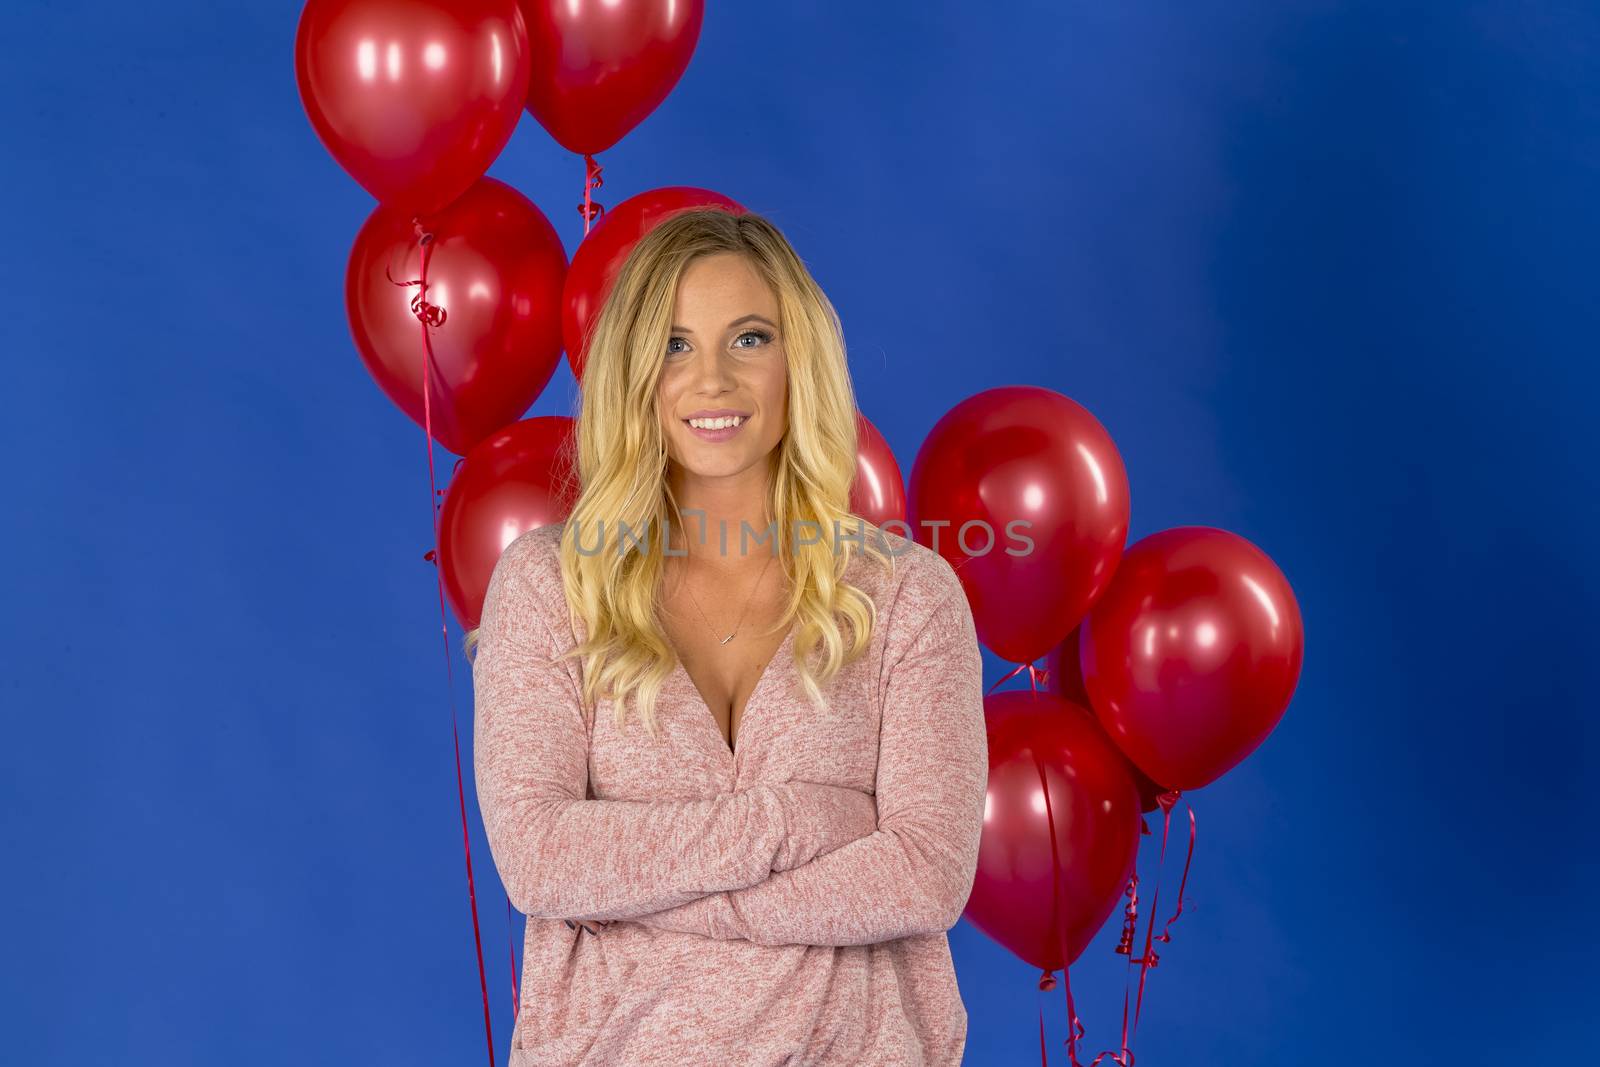 Lovely Blonde Model Posing Against Red Balloons In A Studio Environment by actionsports